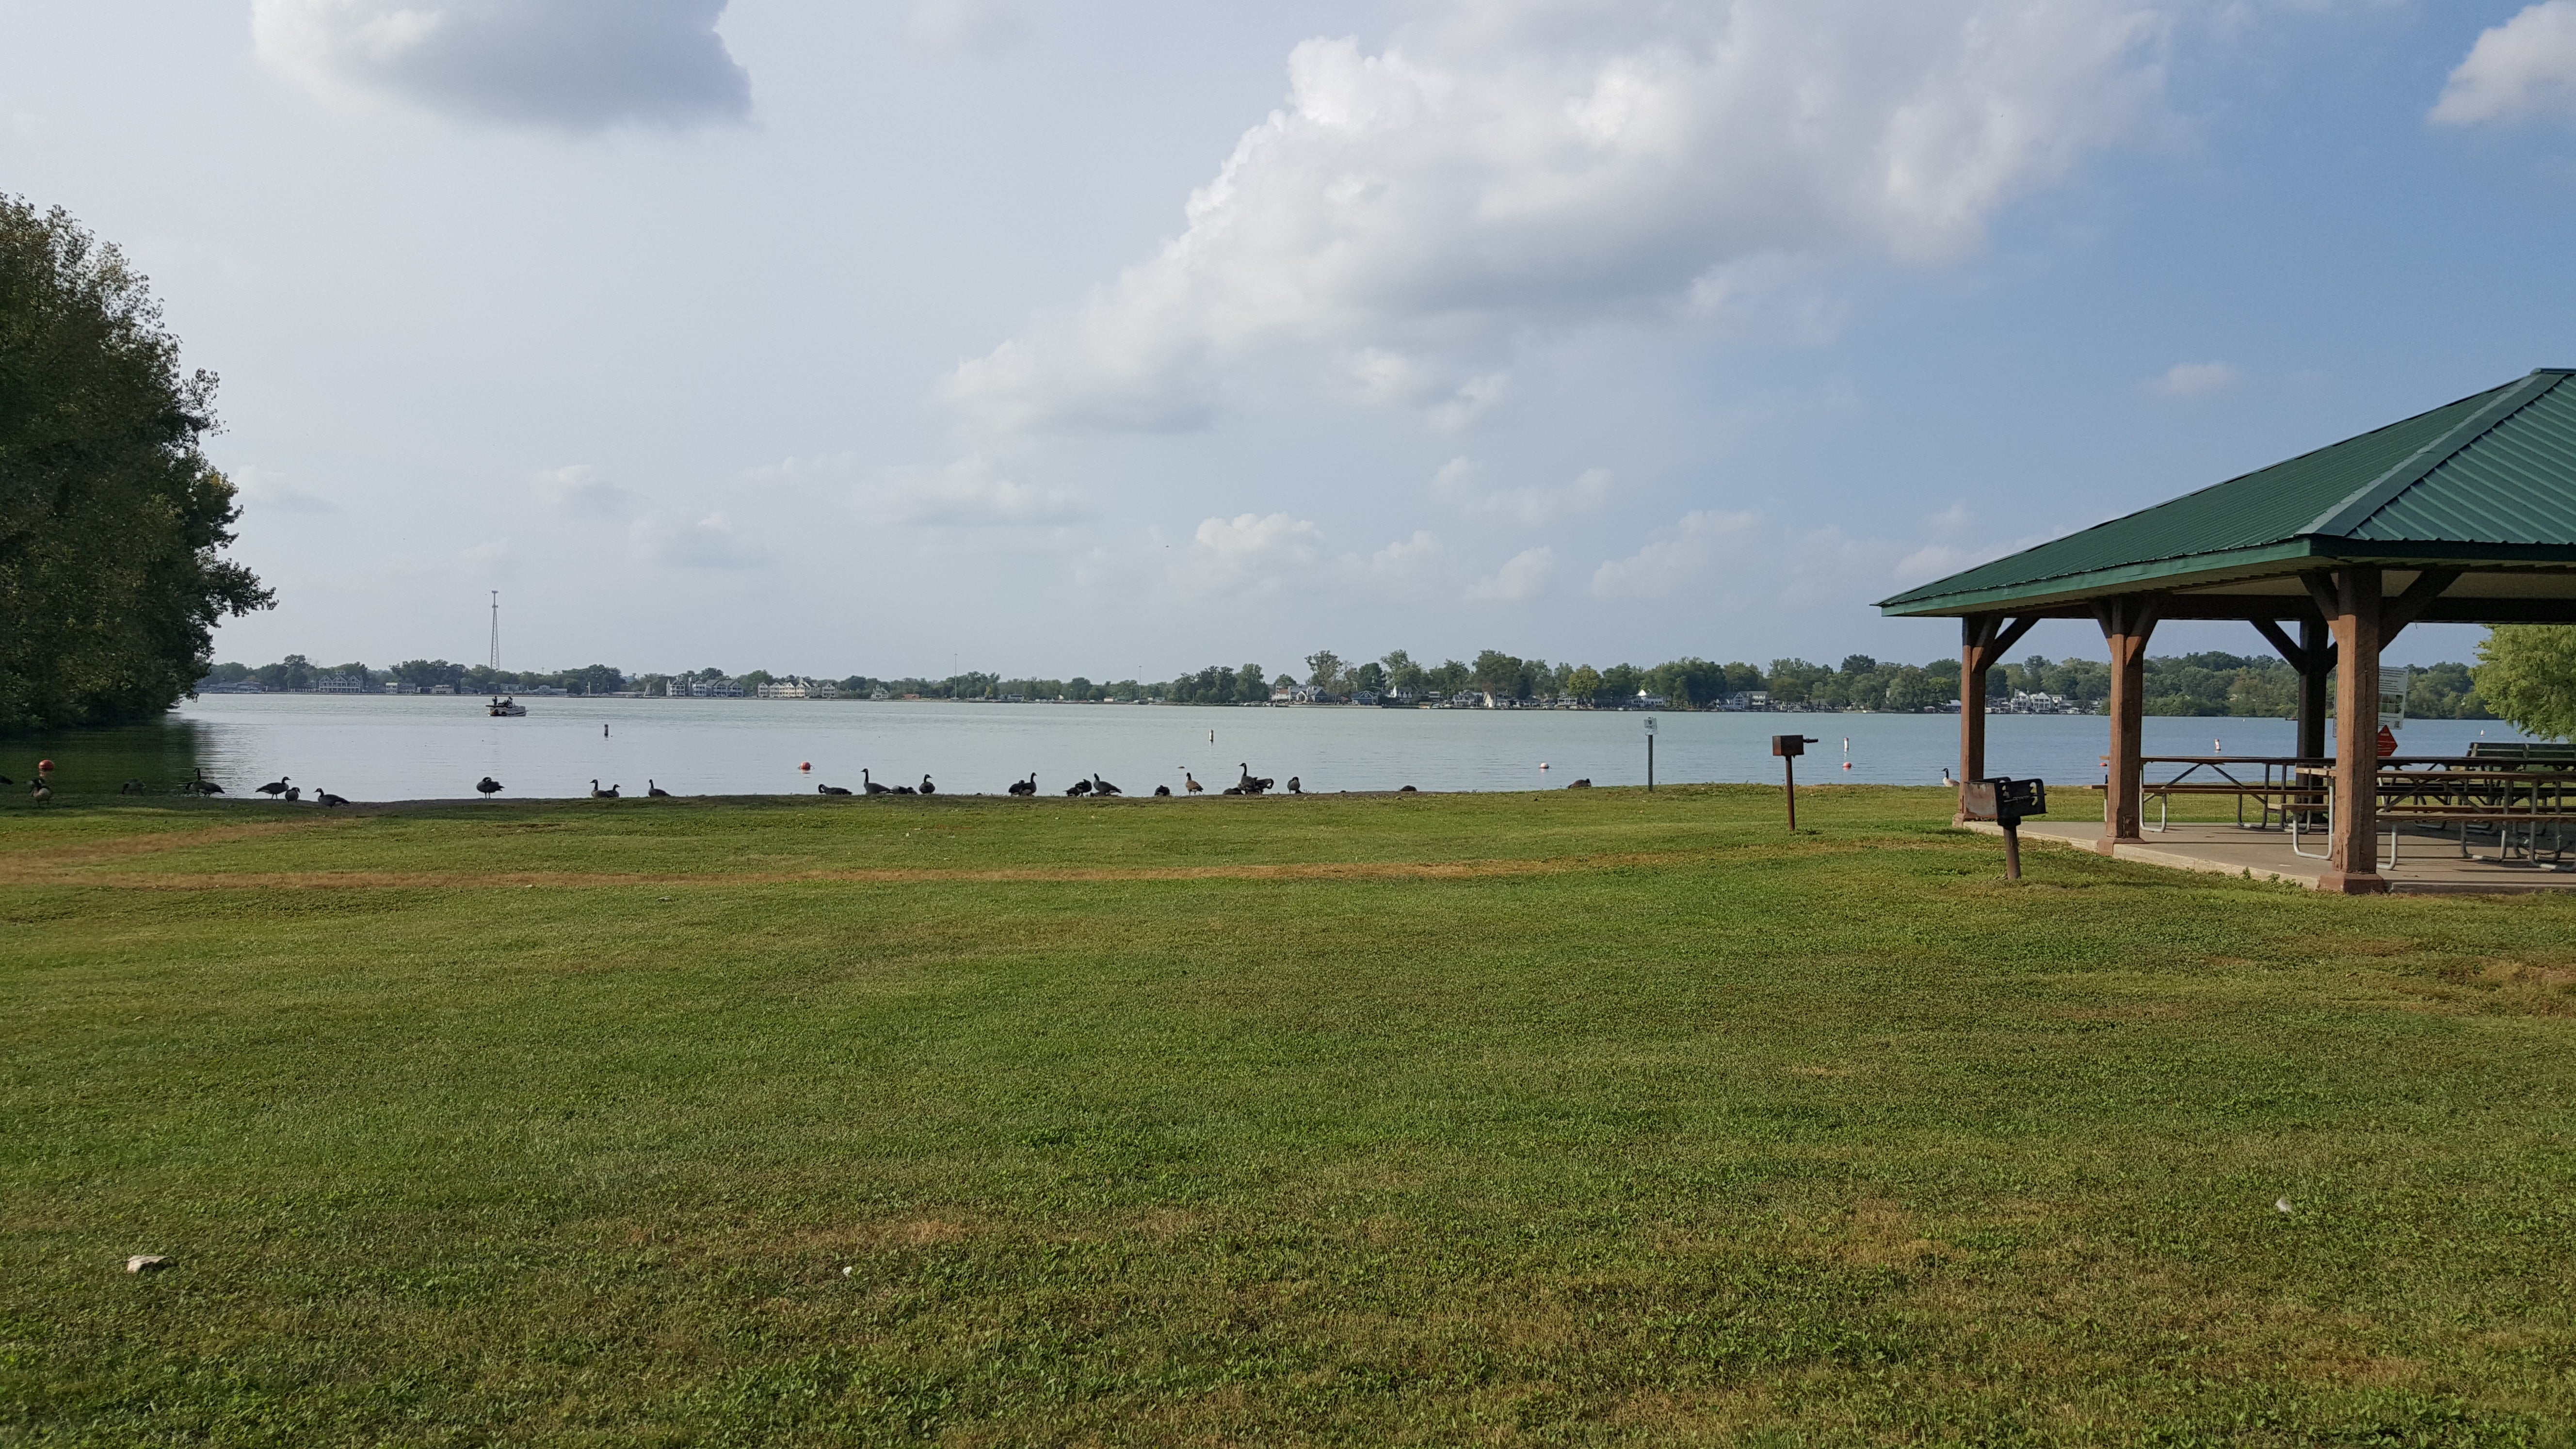 The Ohio version of the beach. It is tricky to enjoy the lake if you don't have your own boat. It doesn't have trails or other things happening for non-boaters.